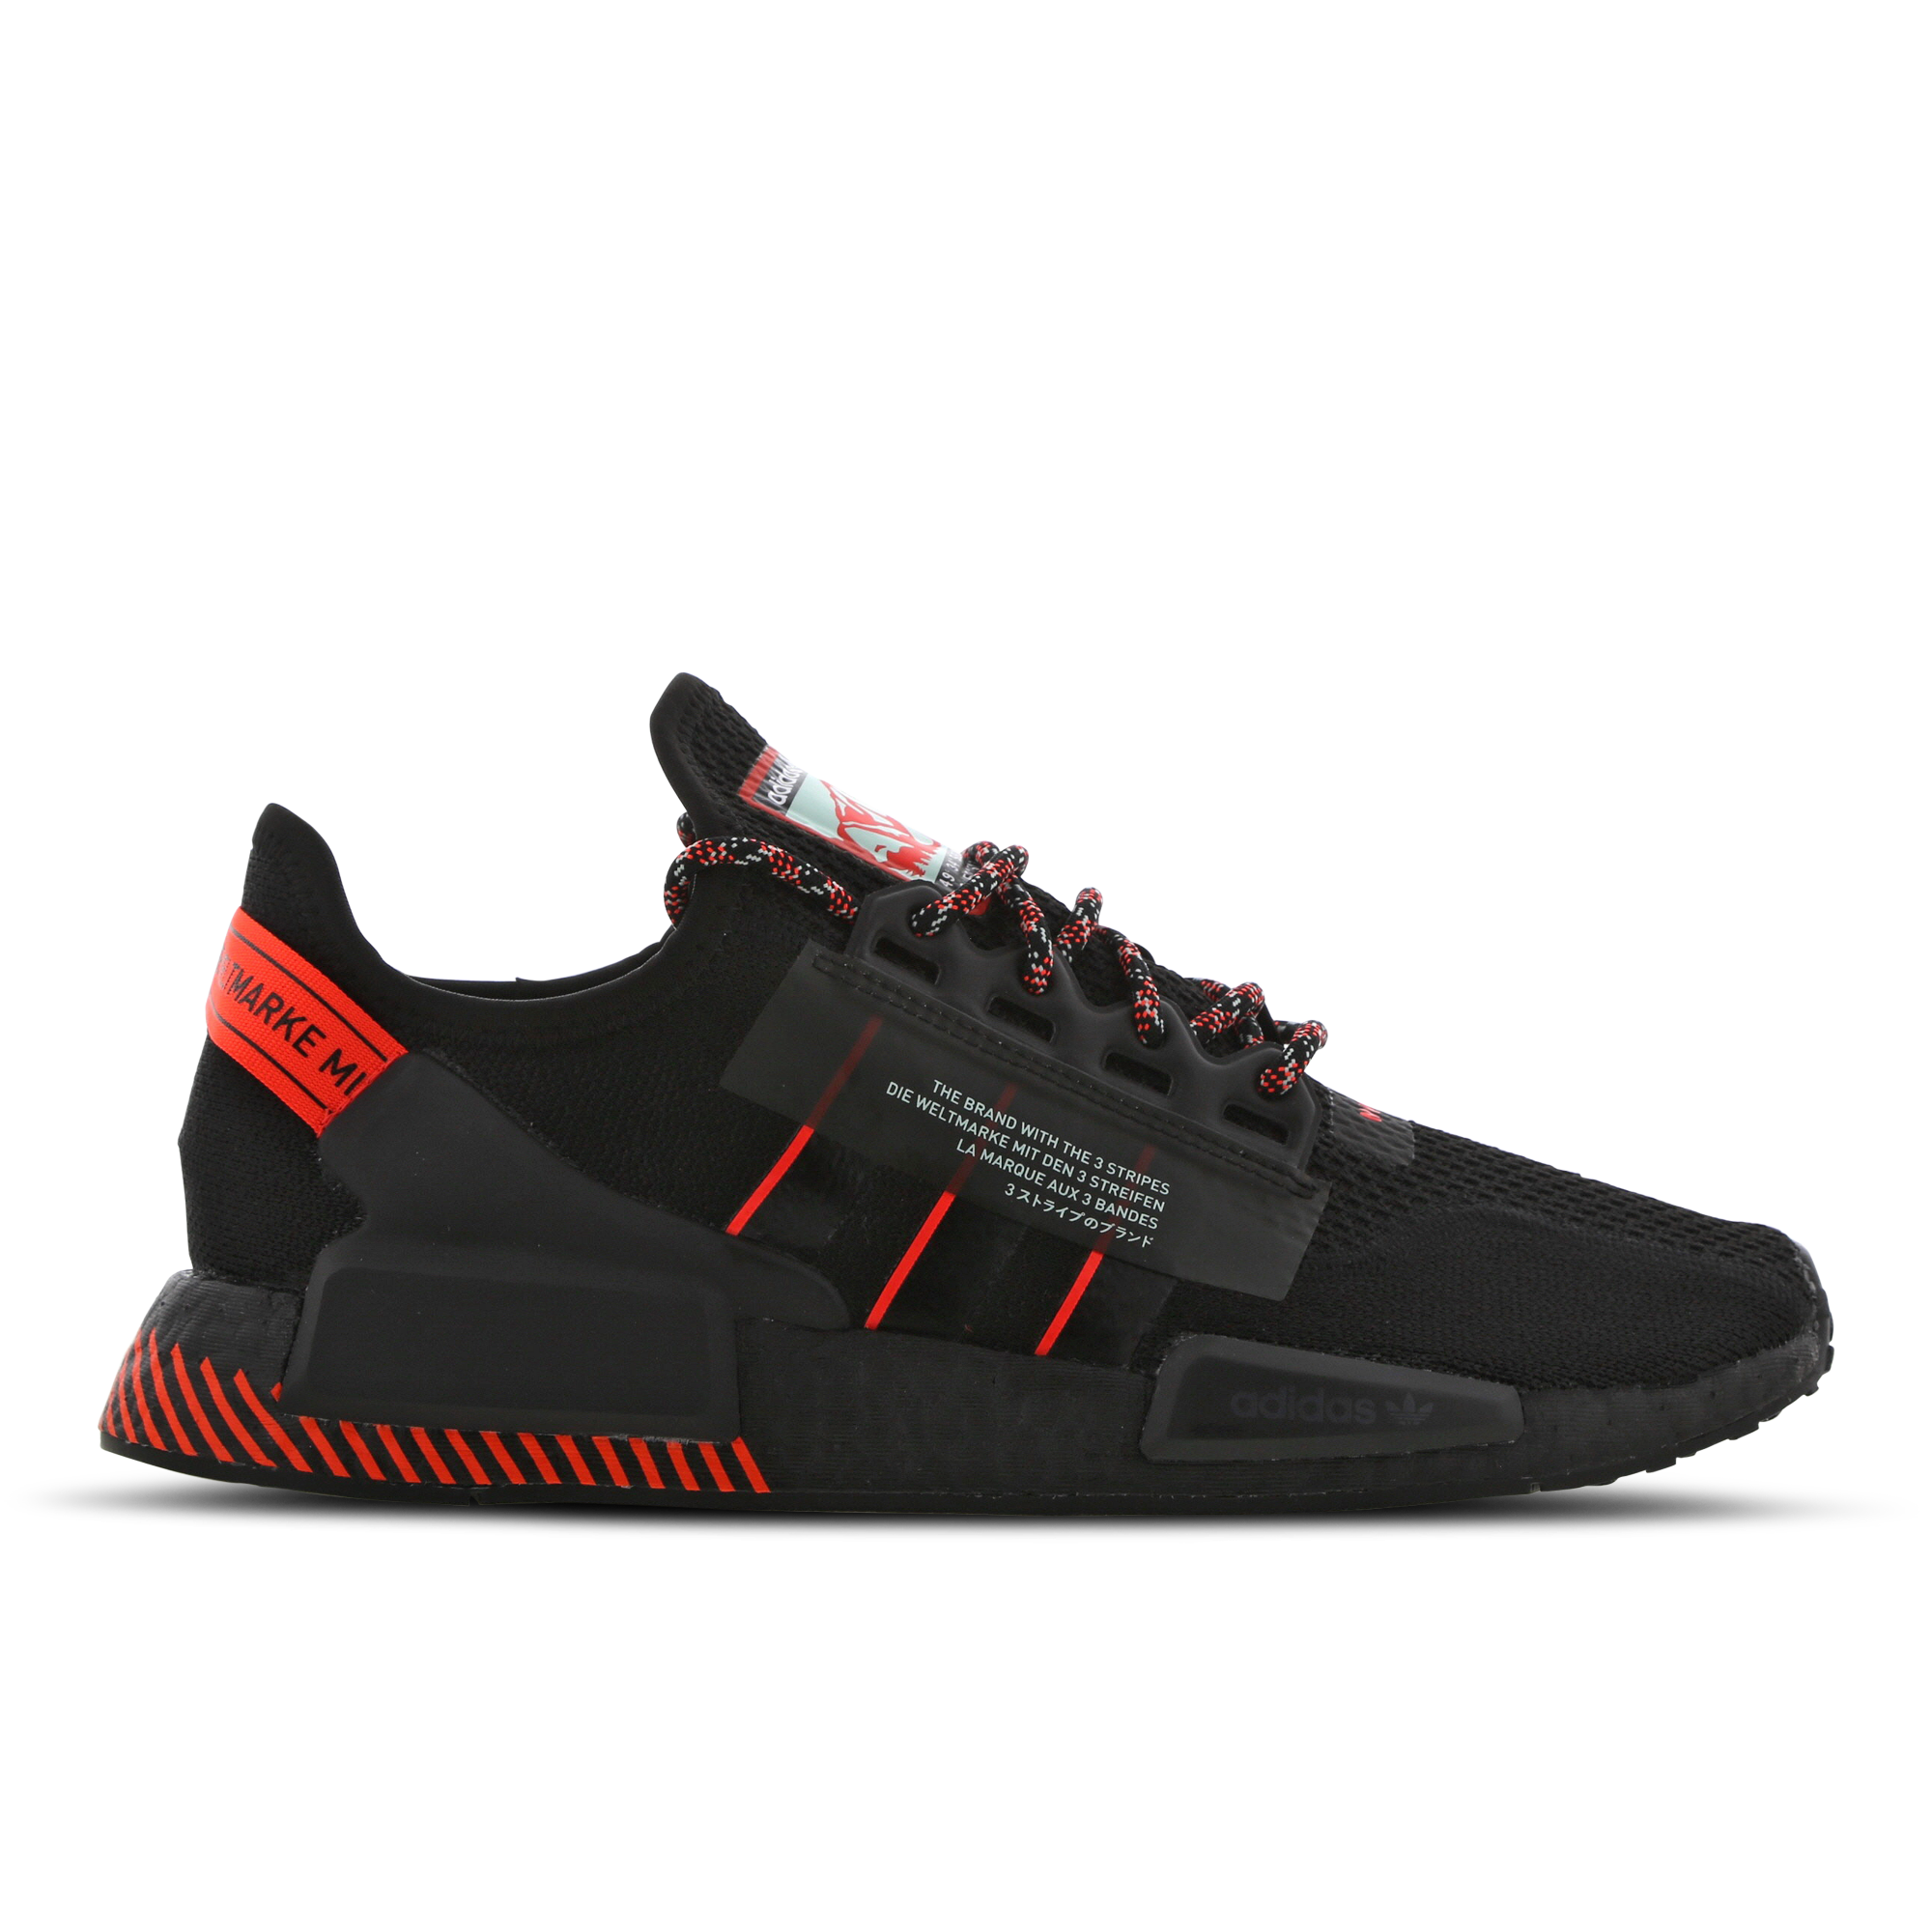 Star wars shoes Shoes Adidas nmd r1 Pinterest